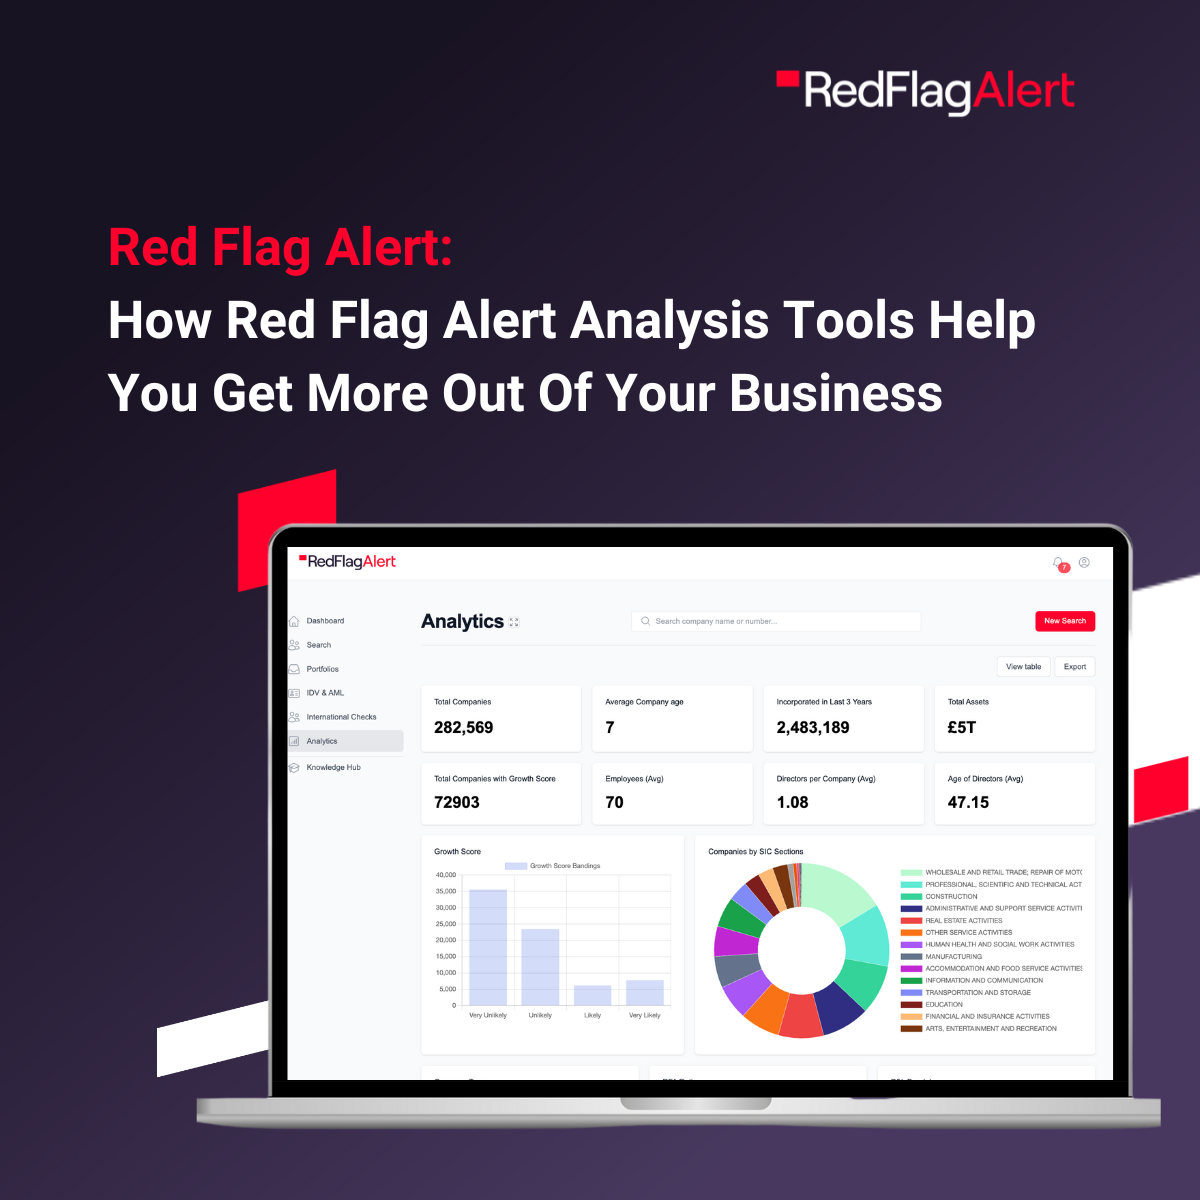 How Red Flag Alert Analysis Tools Help You Get More Out Of Your Business